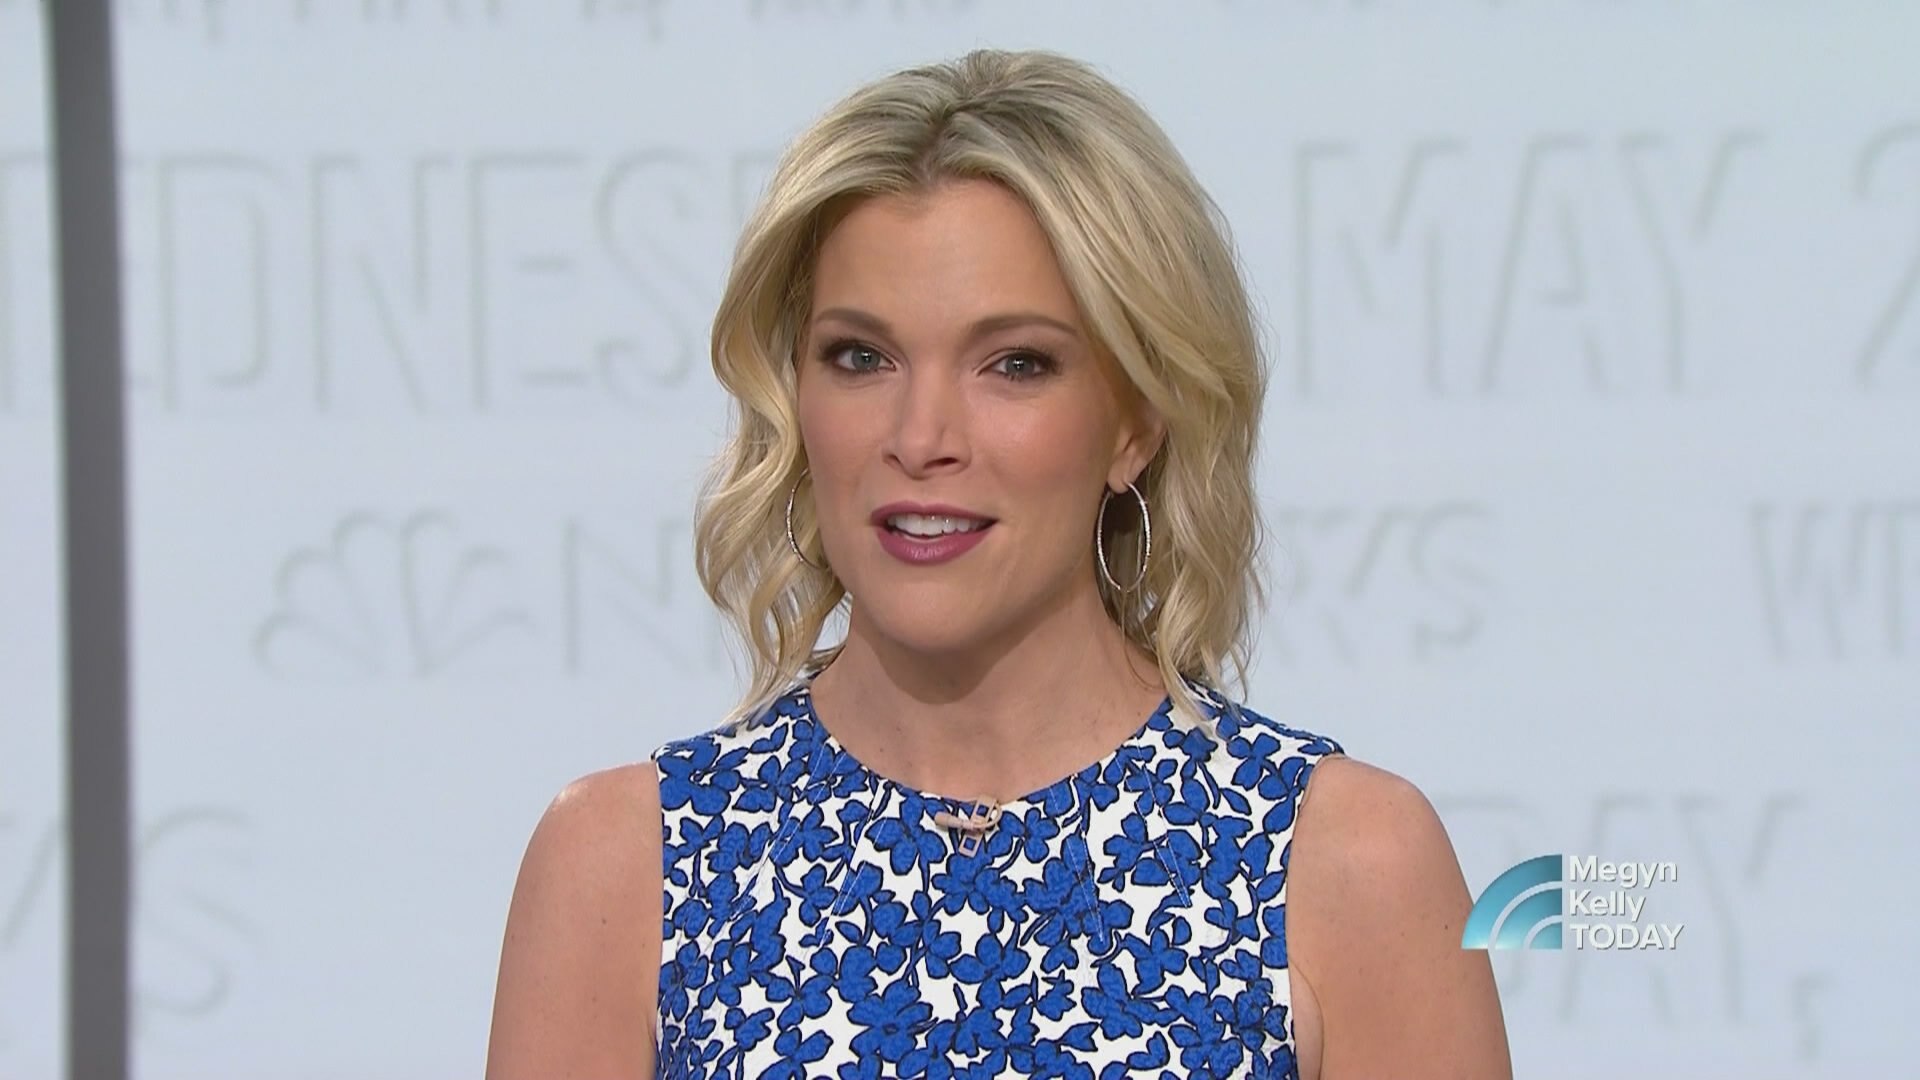 Watch TODAY Episode: Megyn Kelly TODAY-May 2 2018 - NBC.com.